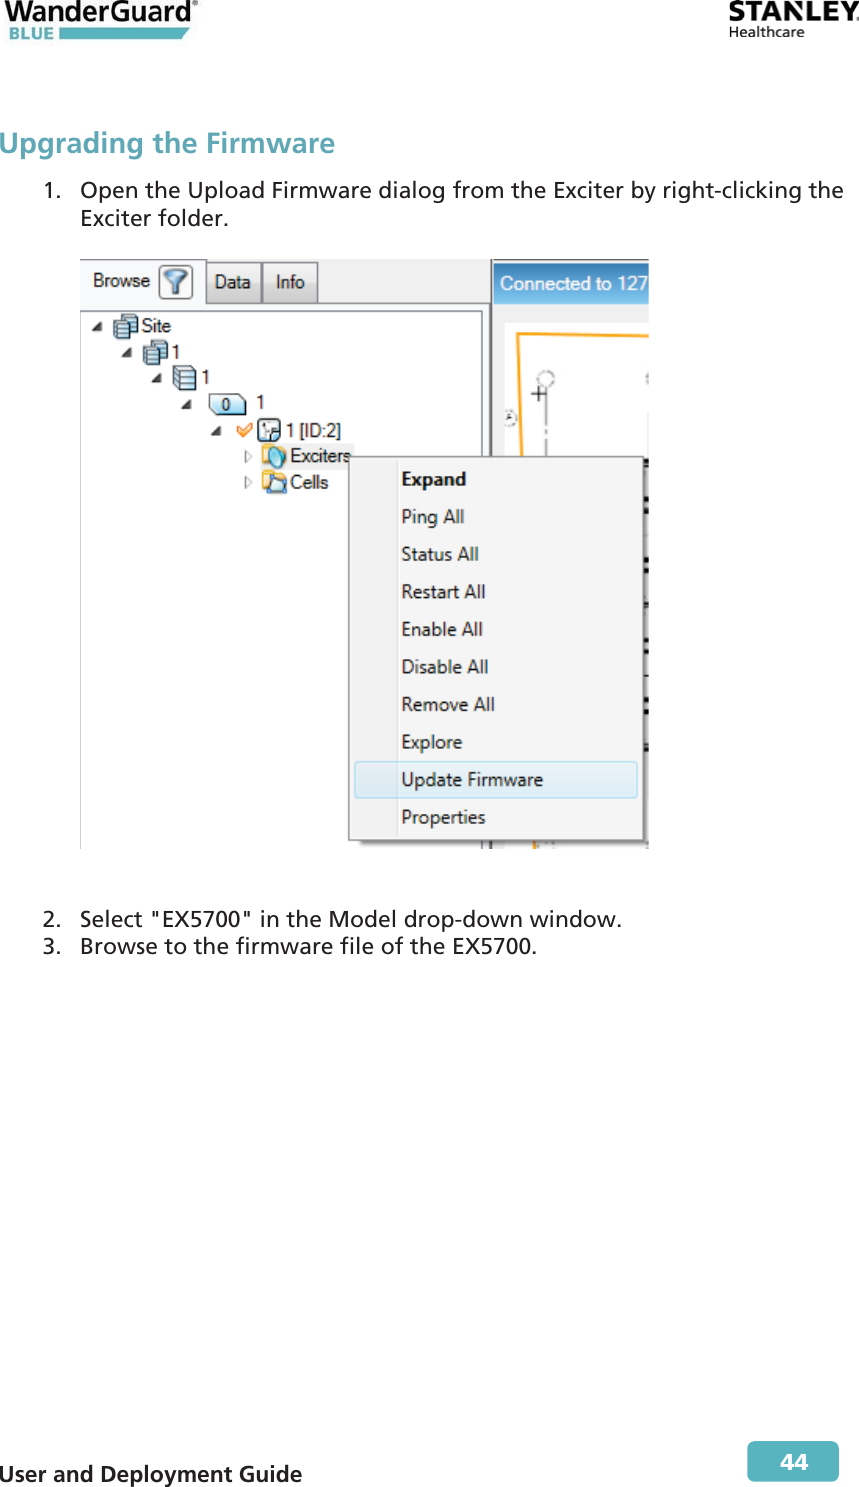  User and Deployment Guide        44 Upgrading the Firmware 1. Open the Upload Firmware dialog from the Exciter by right-clicking the Exciter folder.    2. Select &quot;EX5700&quot; in the Model drop-down window. 3. Browse to the firmware file of the EX5700. 